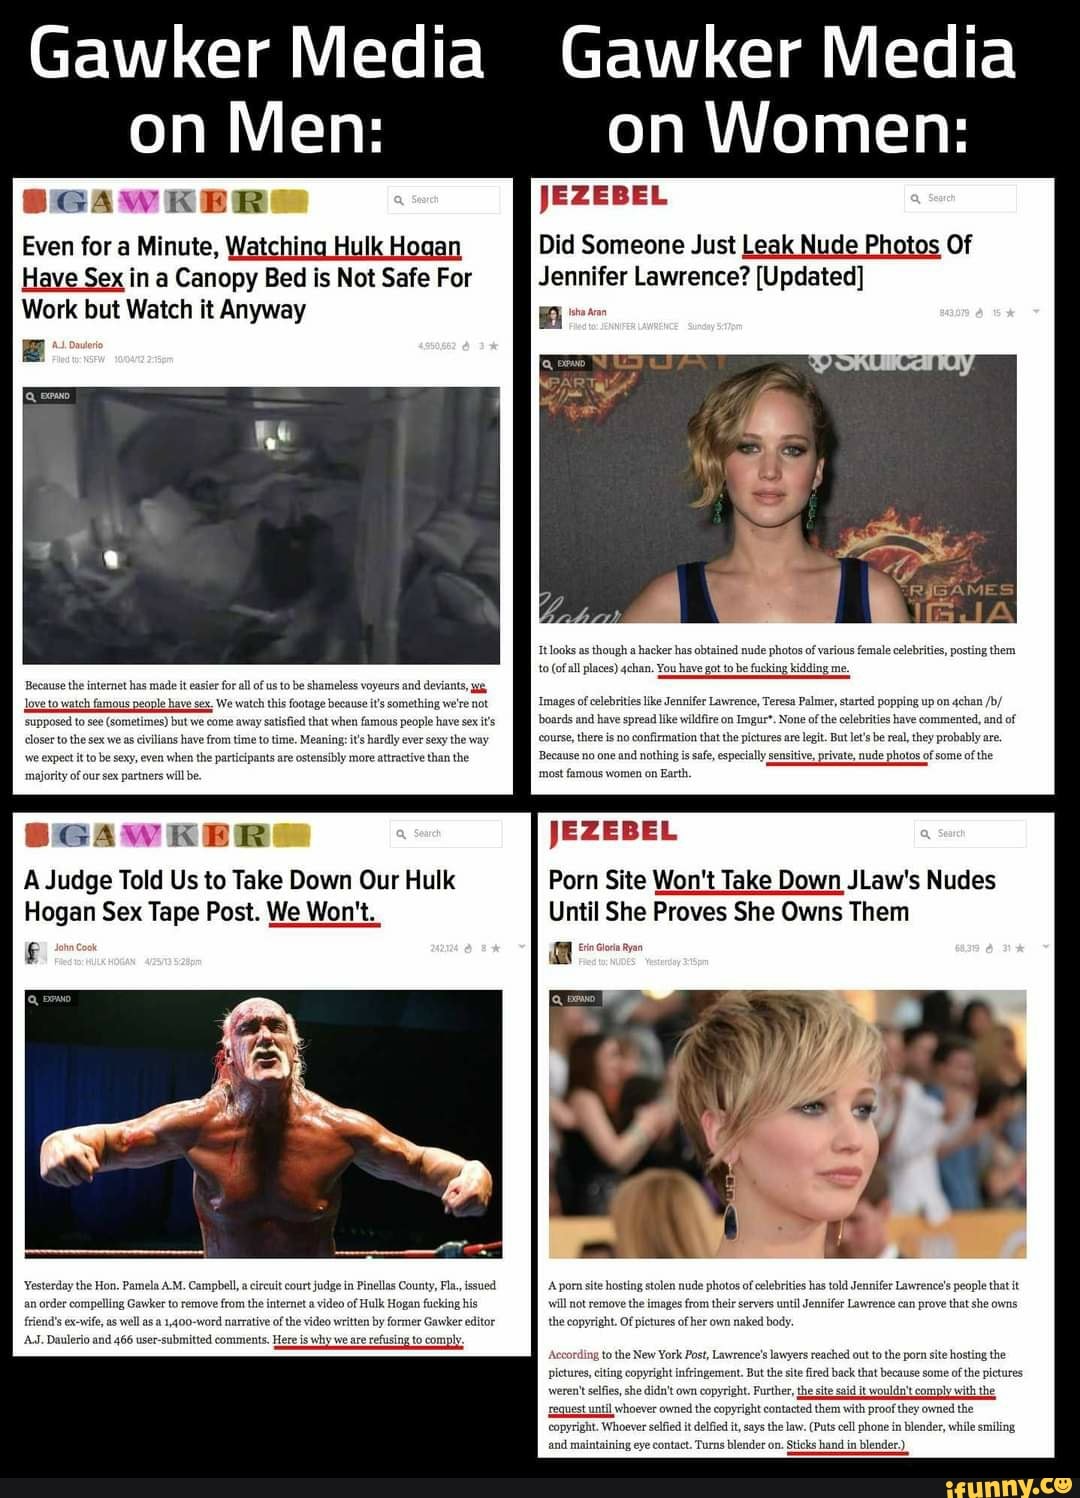 Jennifer Lawrence Sex Tape - Gawker Media on Men: BGAWKER Even for a Minute, Have Sex in a Canopy Bed is